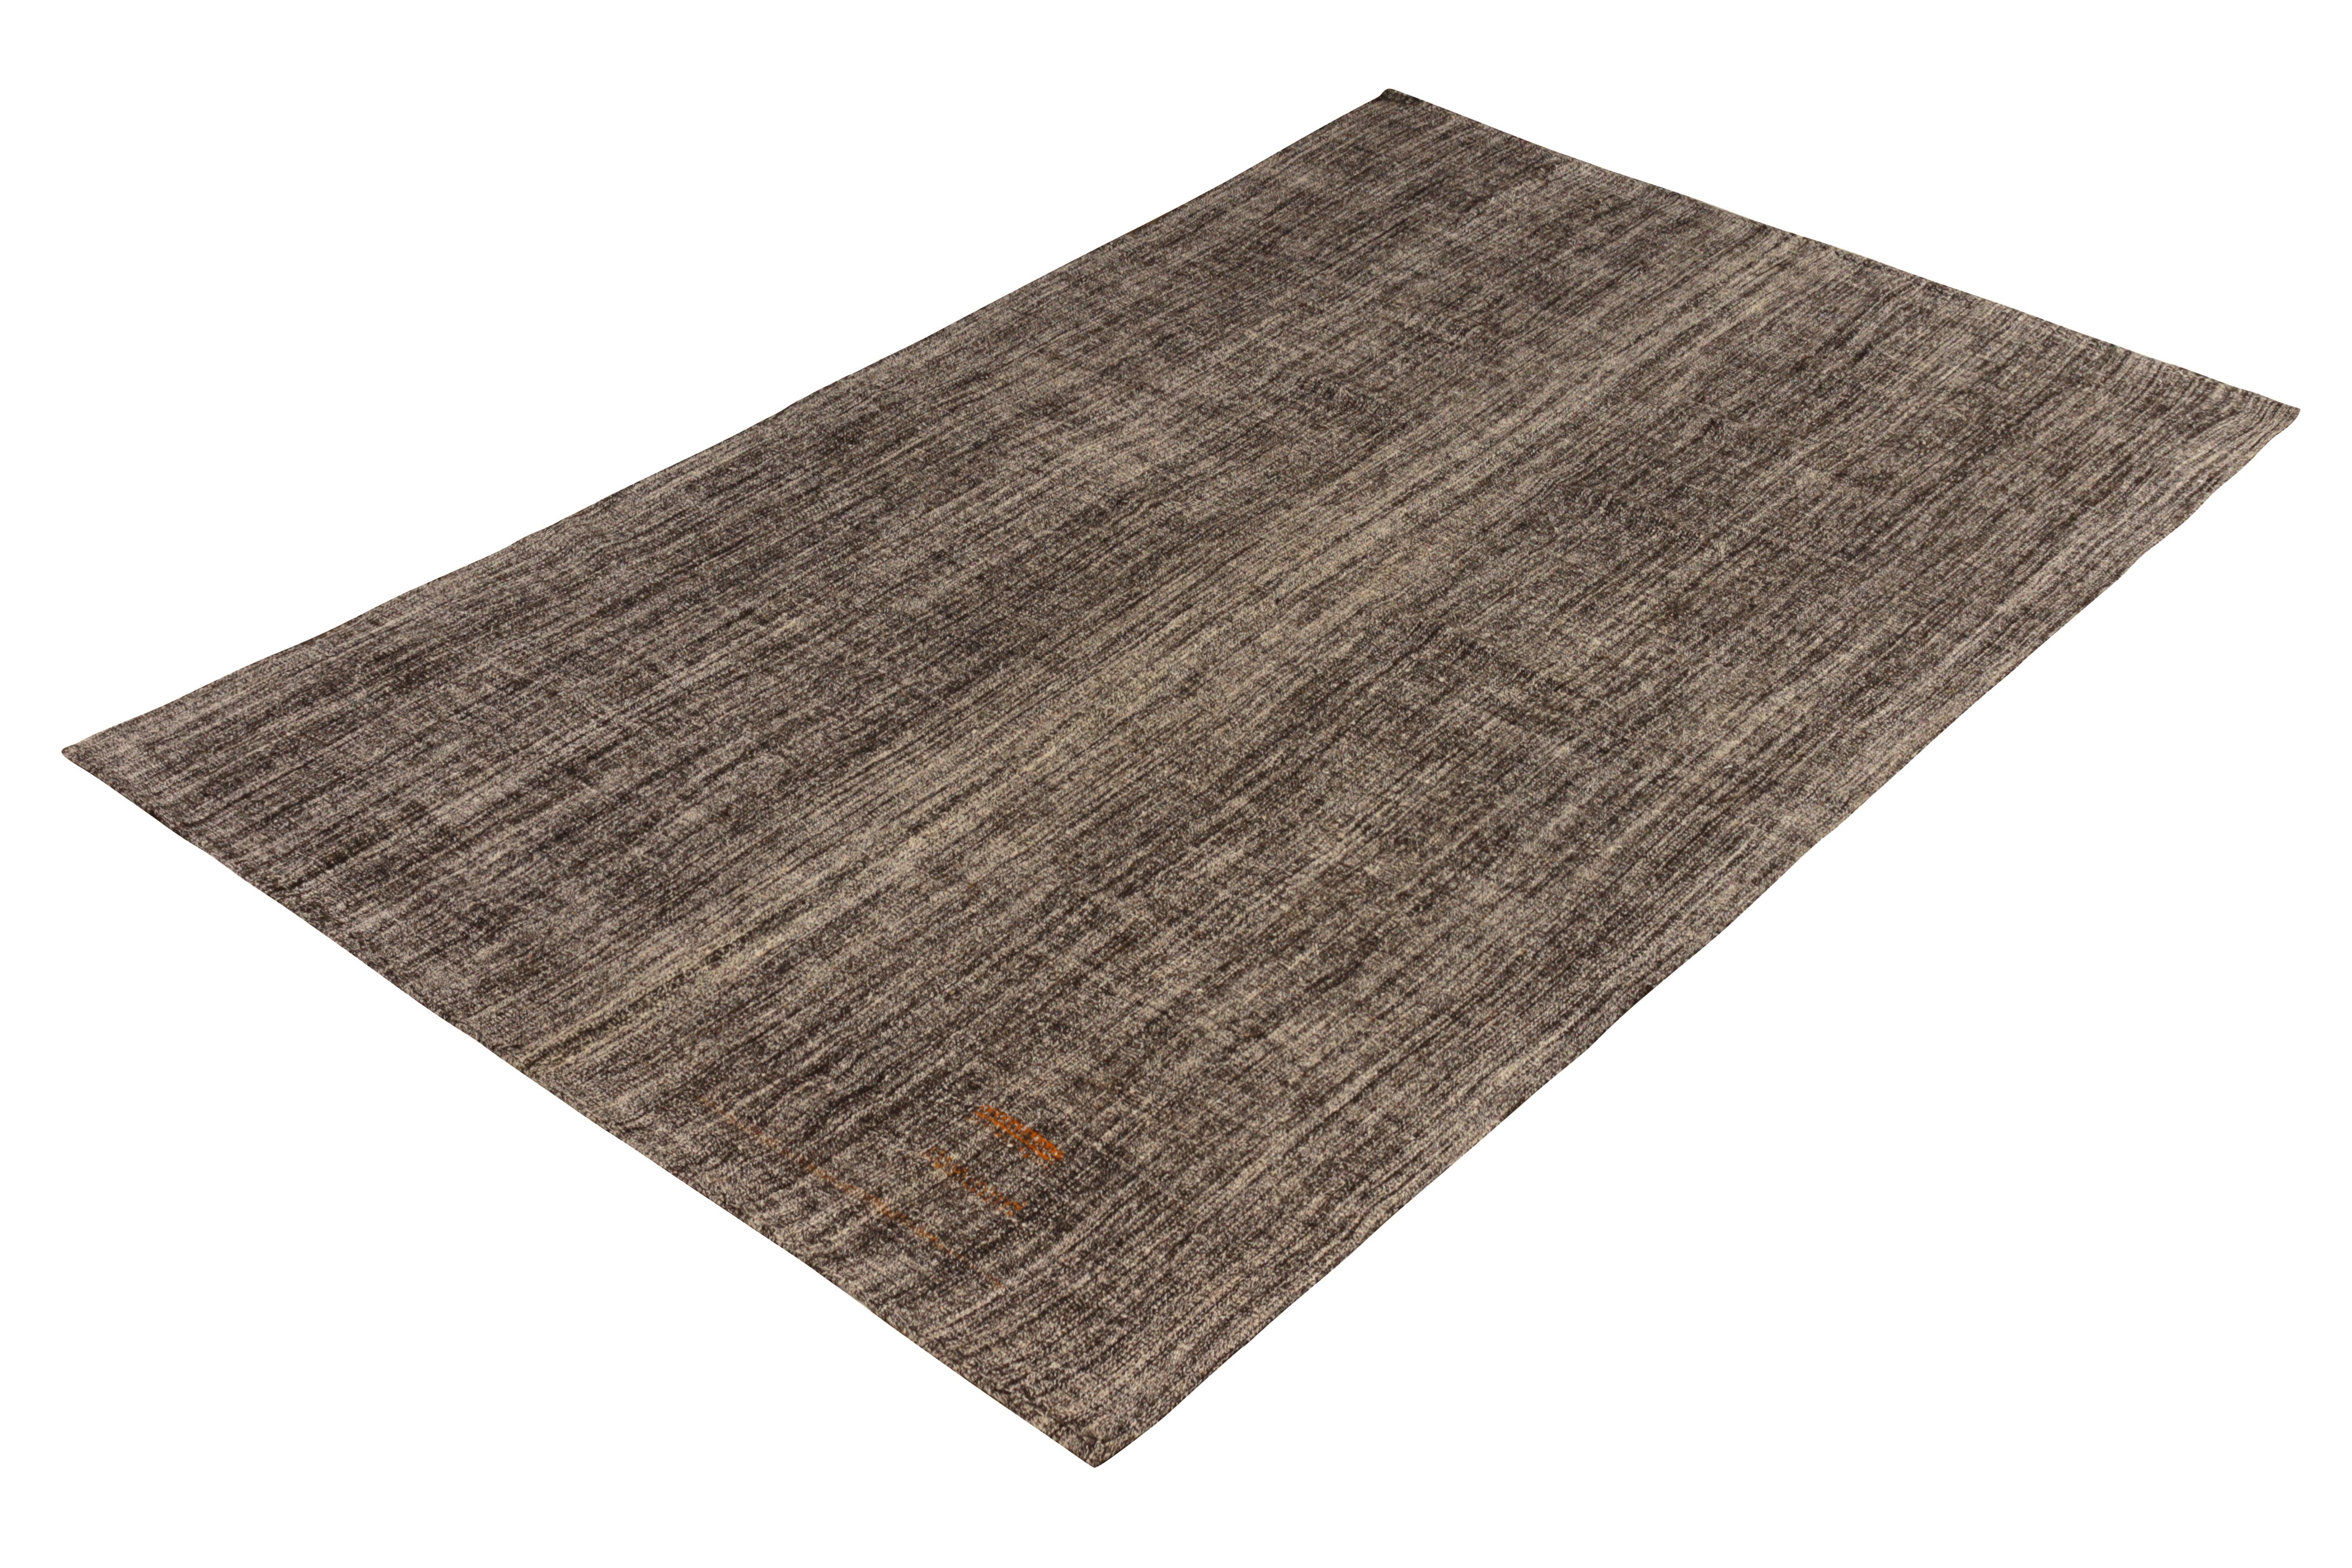 Handmade in flat-woven wool originating circa 1950-1960, this vintage Kilim rug is a transitional piece that is notably versatile in terms of its all-over stripe design applications in deep, modern colors. Relying on black and gray colorways, the